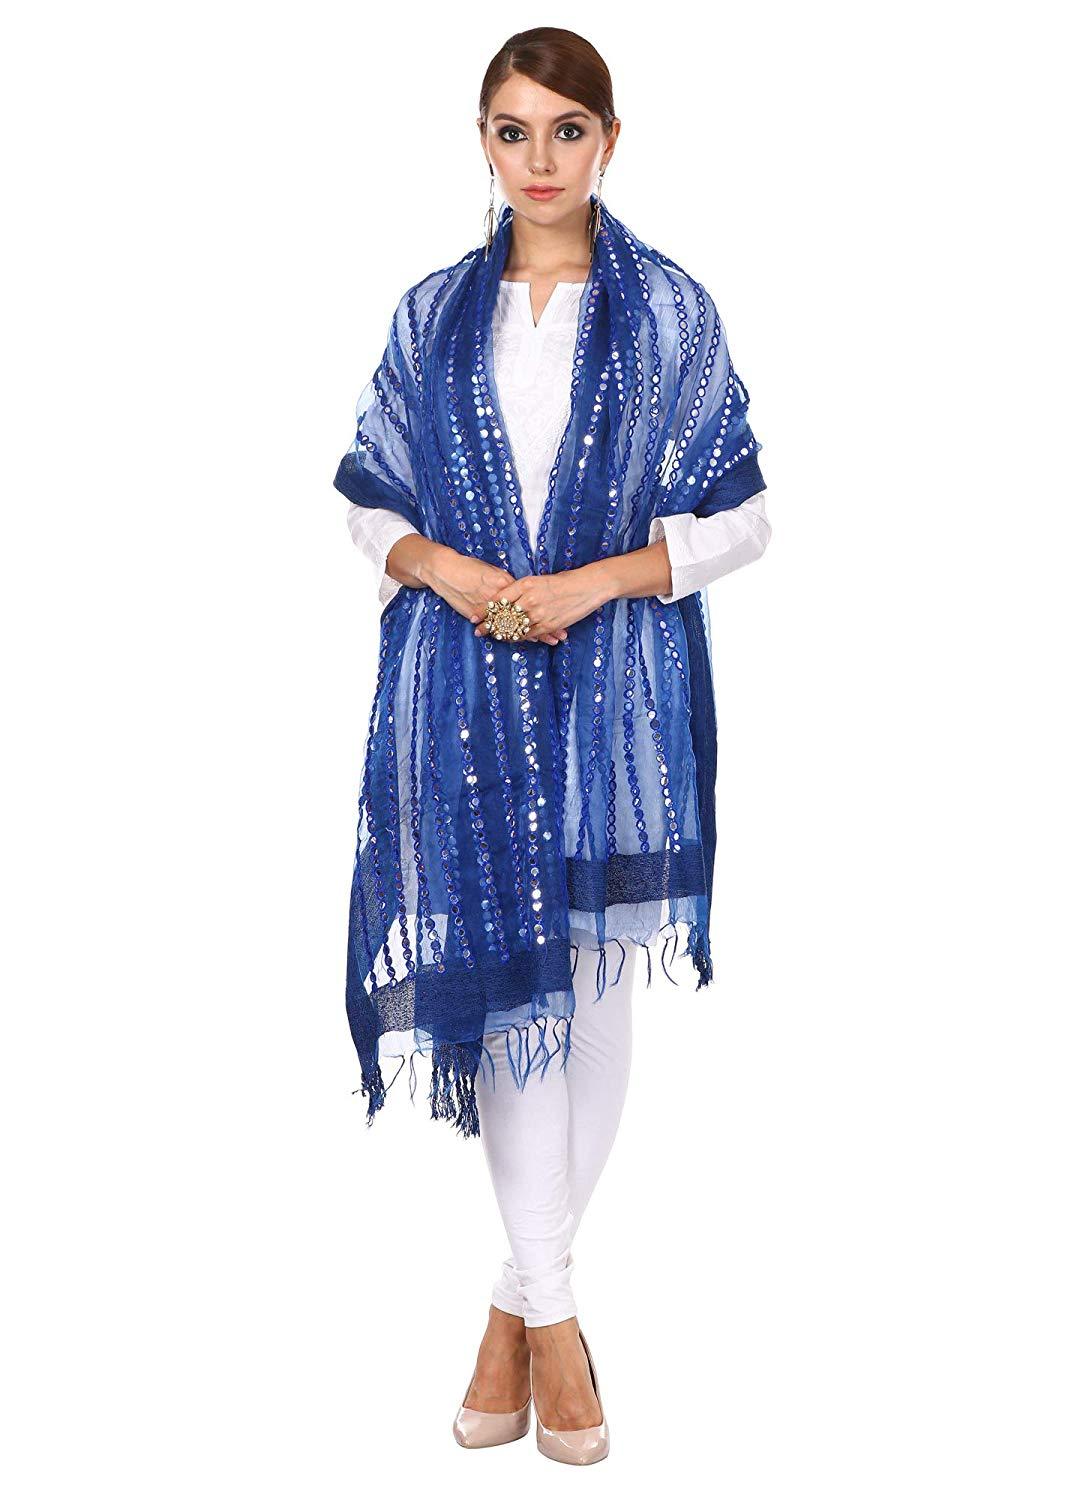 Pashtush Womens Chiffon Handmade Dupatta With Sequin And Mirror Work Embroidery, Light Weight, Blue, Free Size